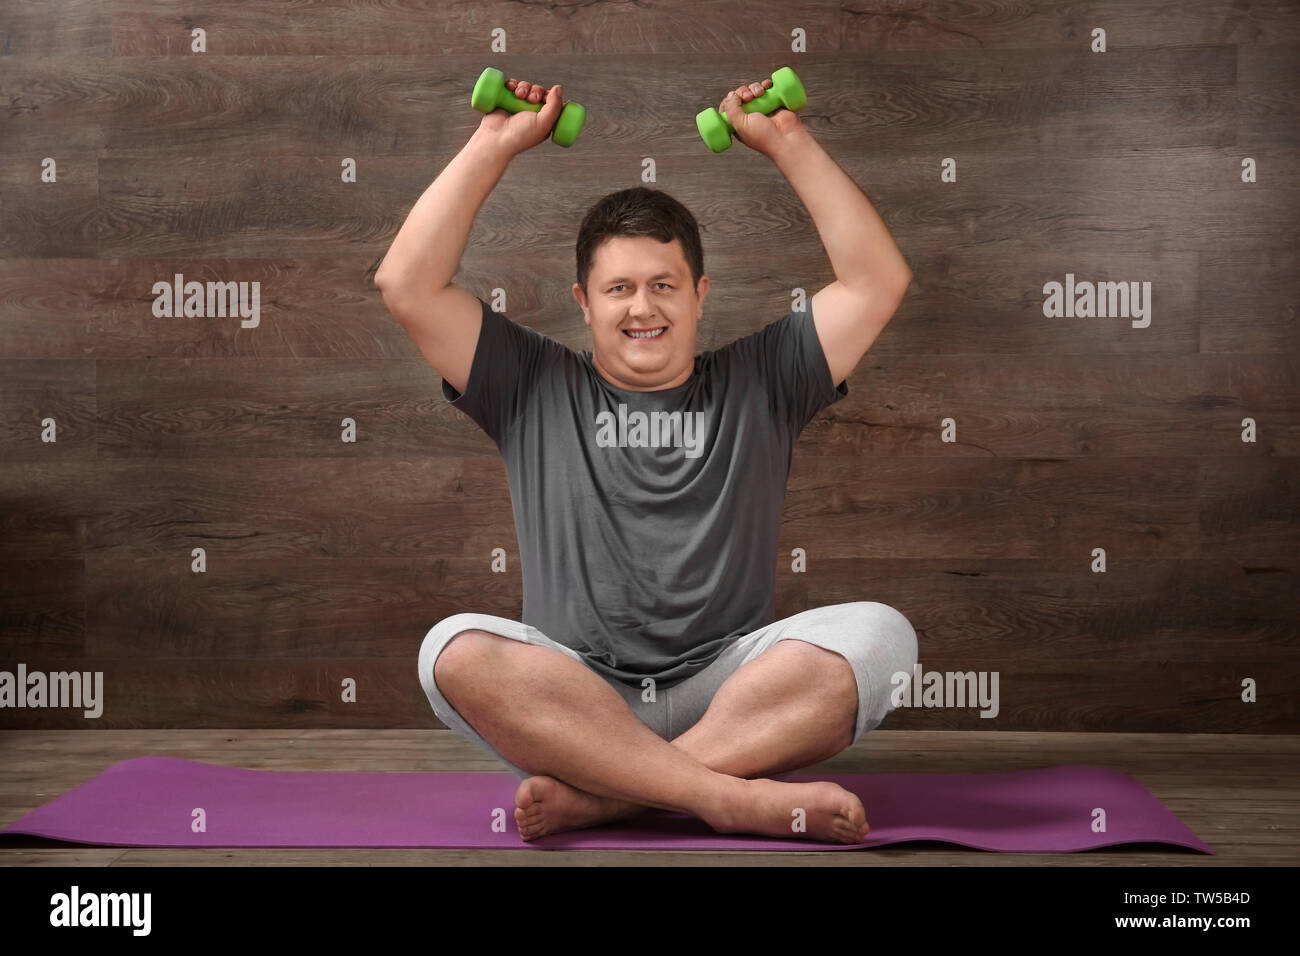 Overweight man training with dumbbells against wooden wall Stock Photo